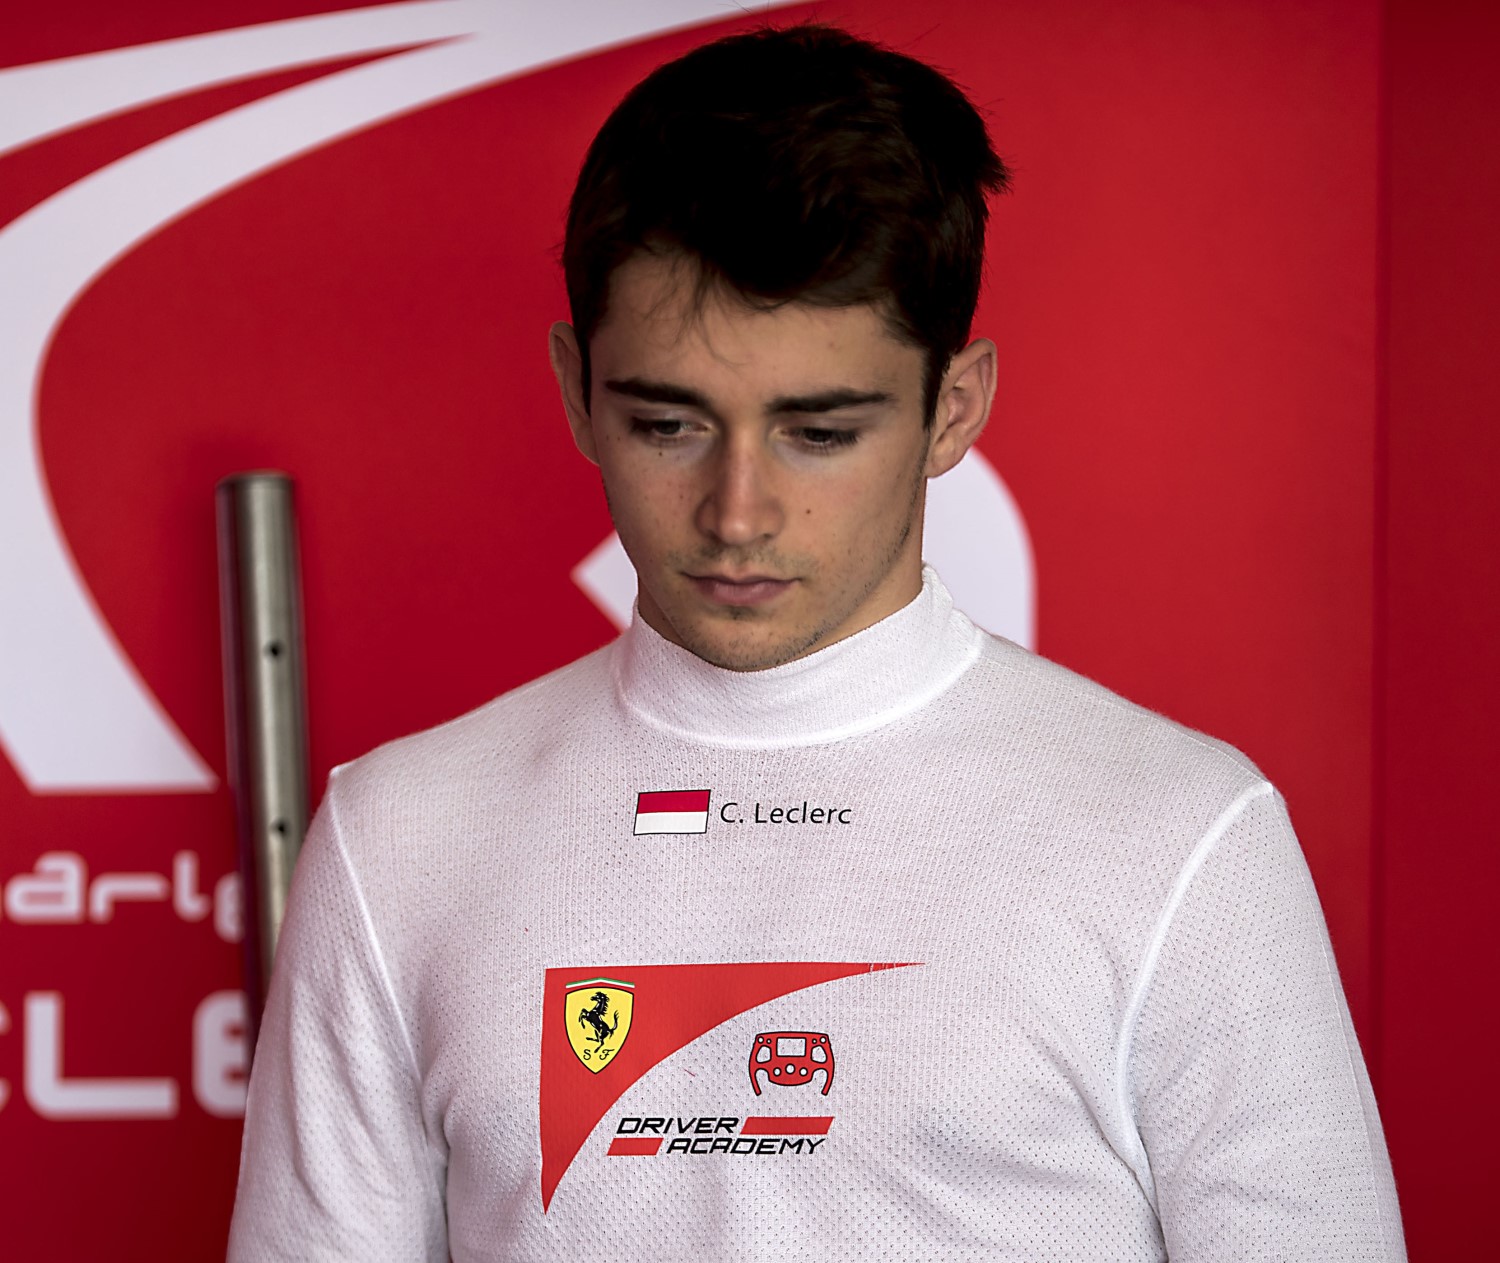 Leclerc will probably replace Raikkonen in a couple of years